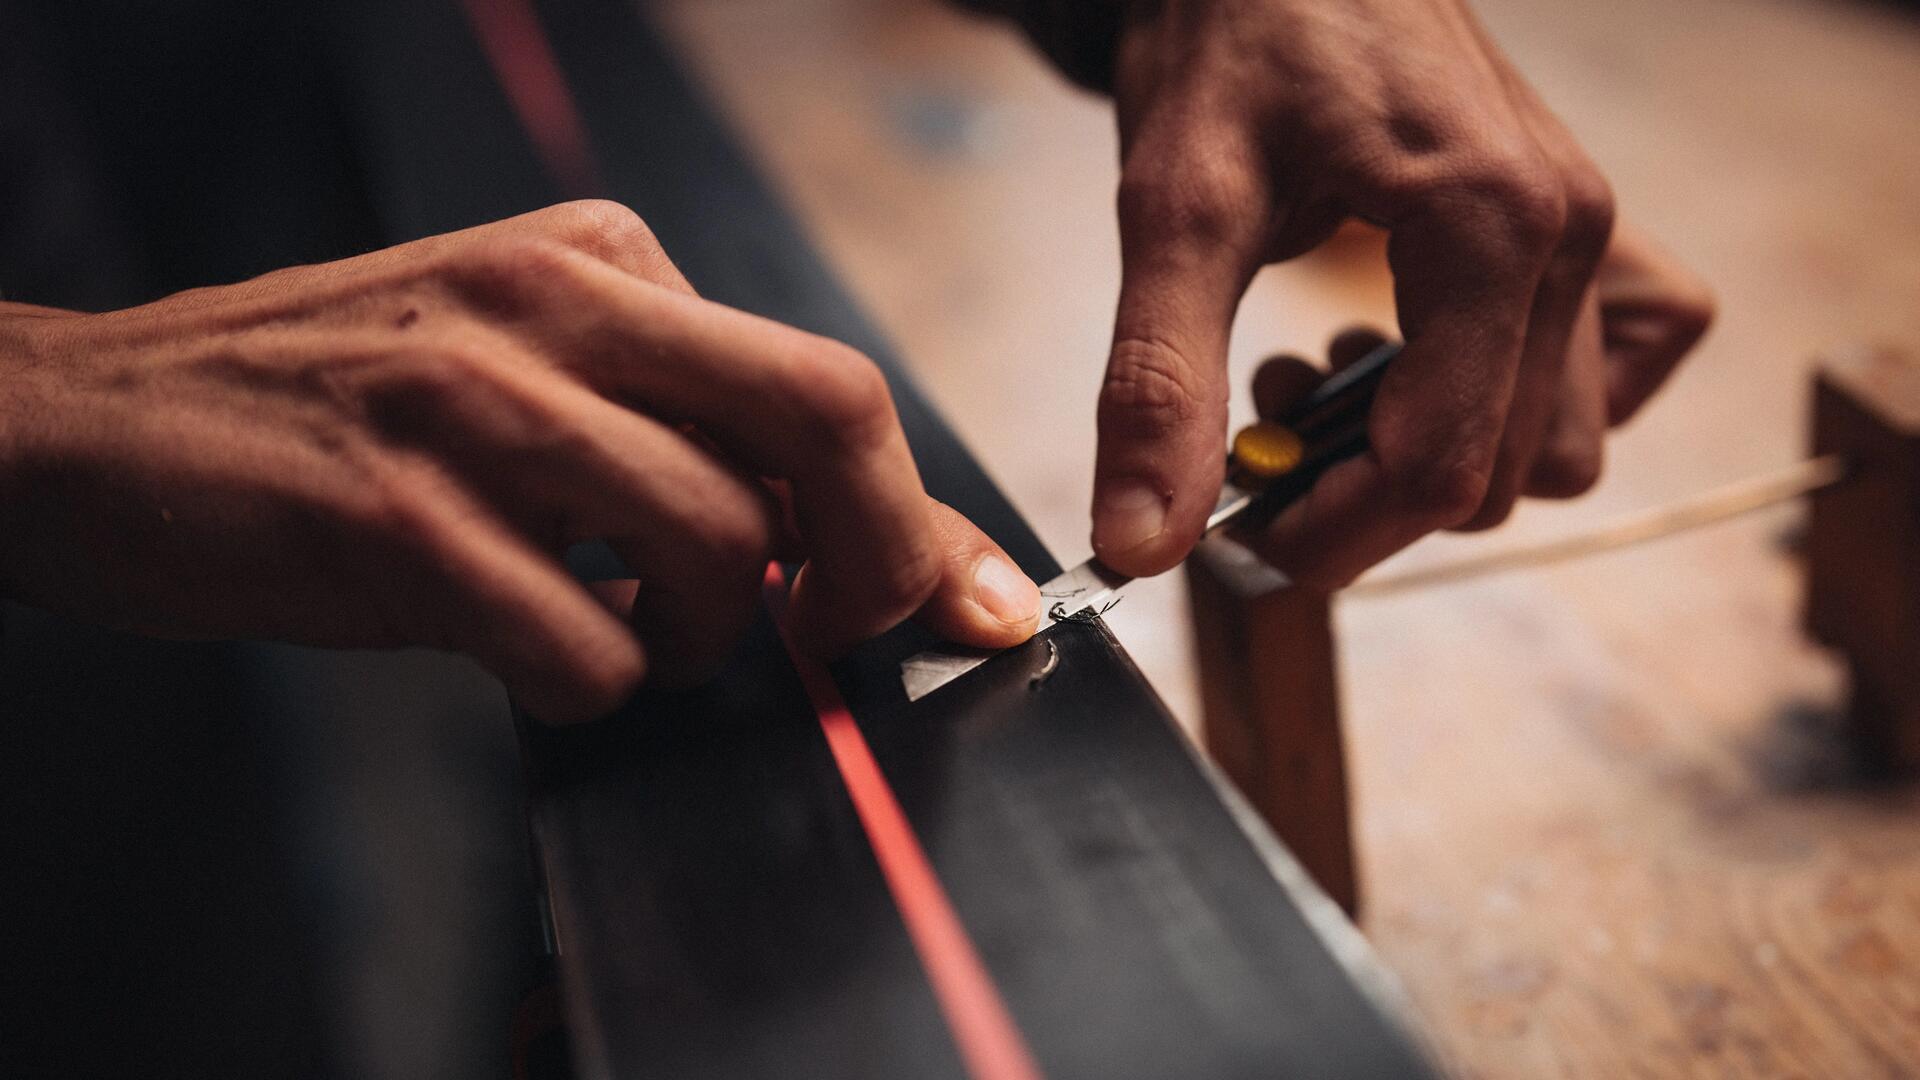 What maintenance should you do to your skis at the end of the season?